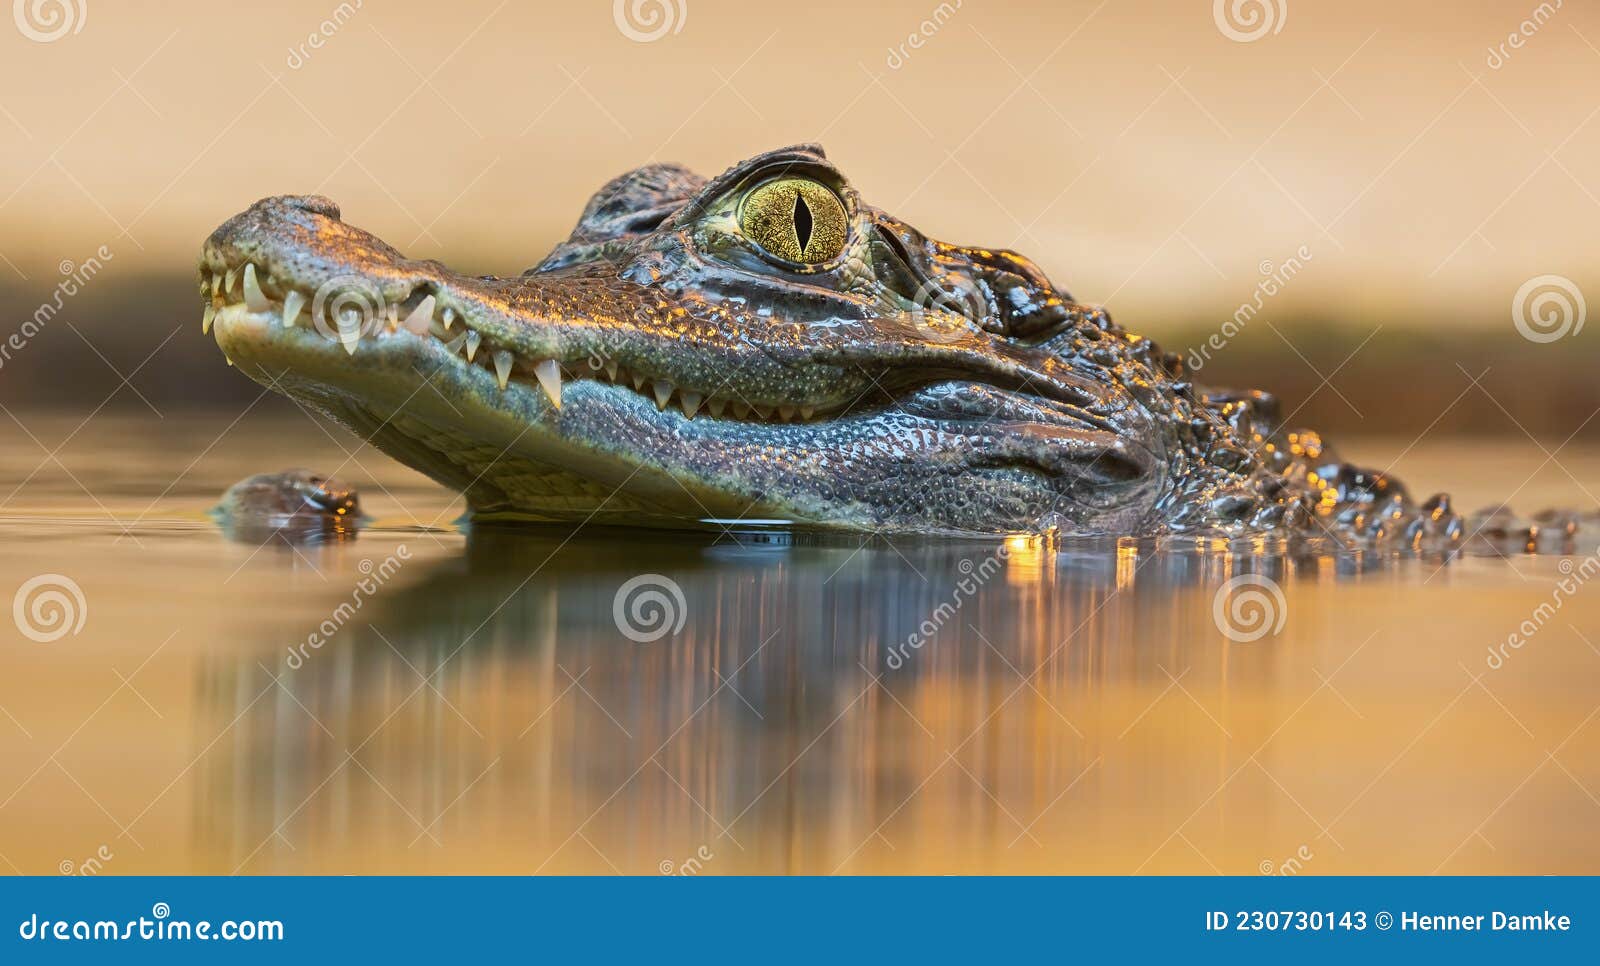 portrait view of a spectacled caiman